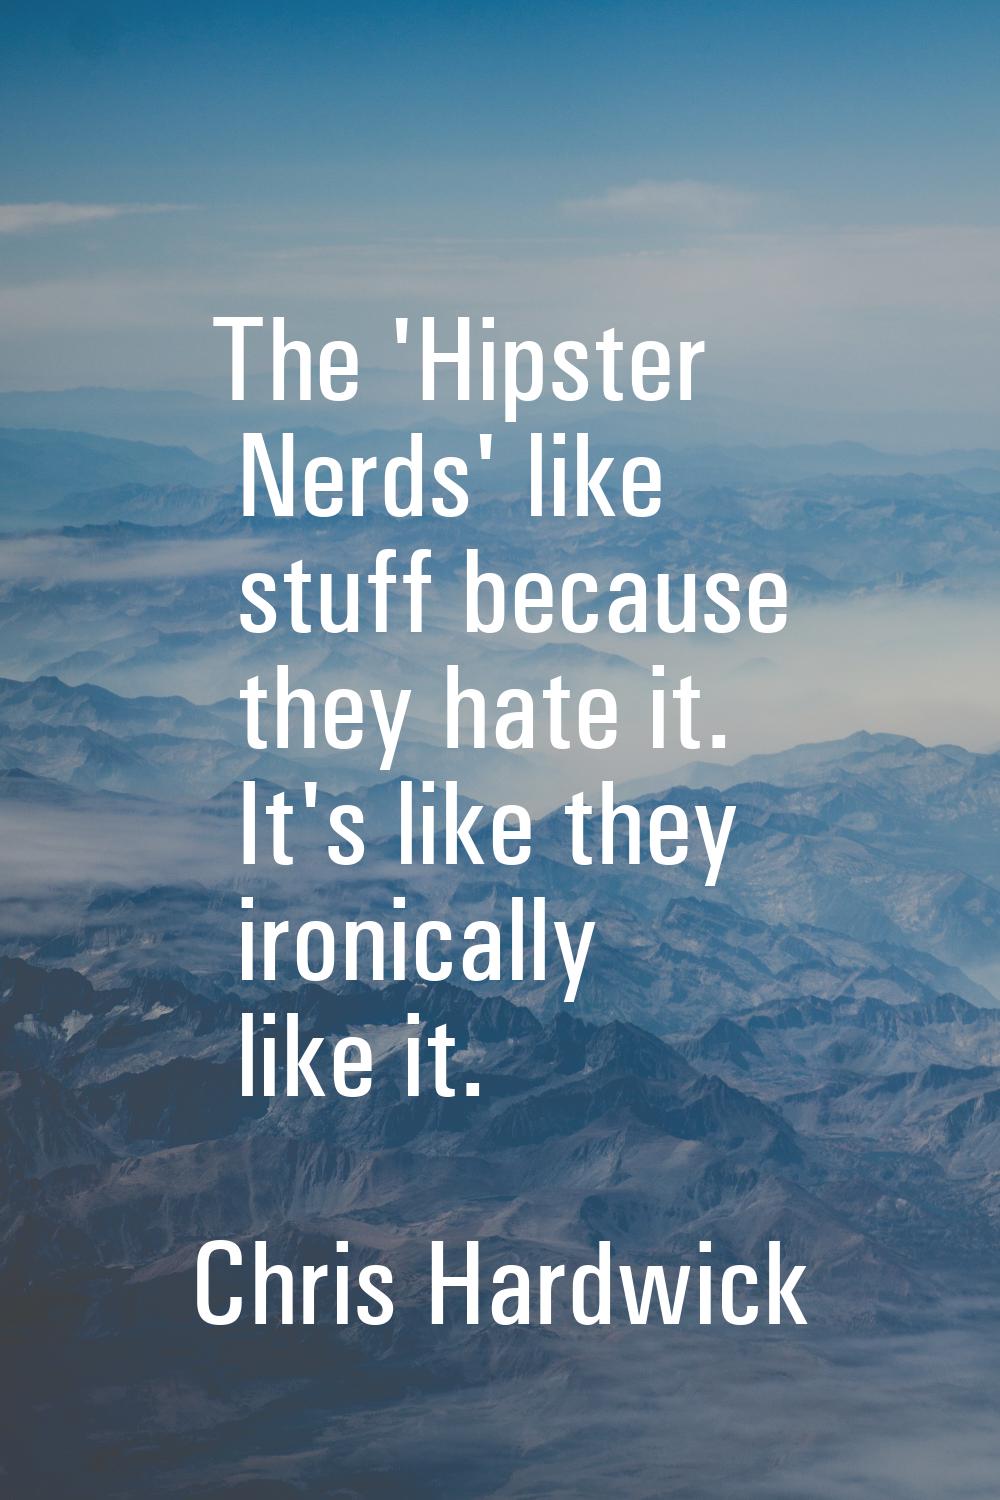 The 'Hipster Nerds' like stuff because they hate it. It's like they ironically like it.